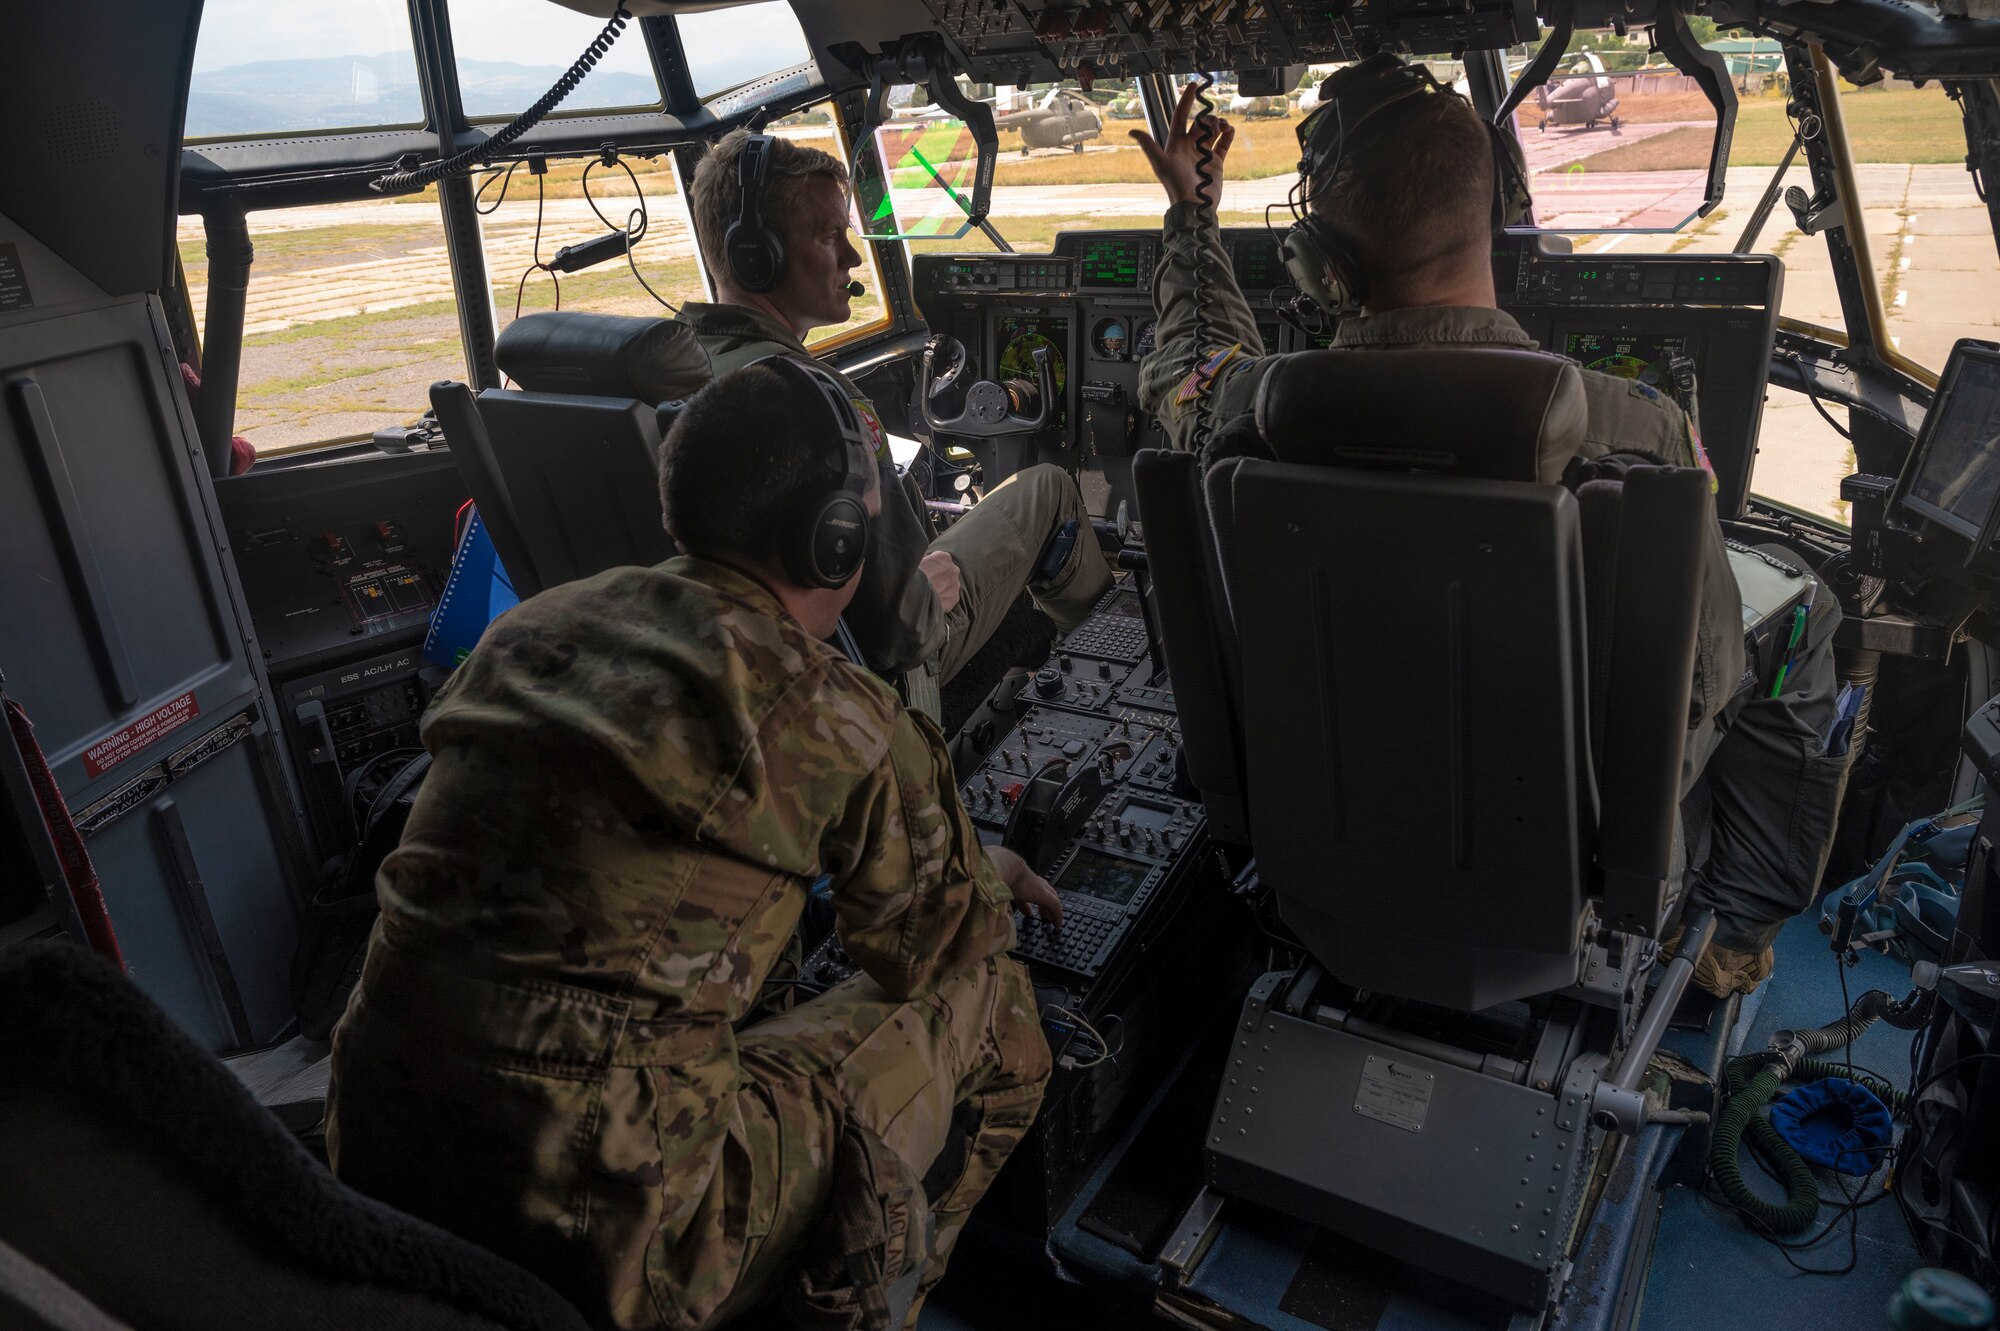 Three U.S. Air Force pilots assigned to the 37th Airlift Squadron conduct pre-flight checks in a C-130J Super Hercules aircraft during exercise Agile Spirit 21